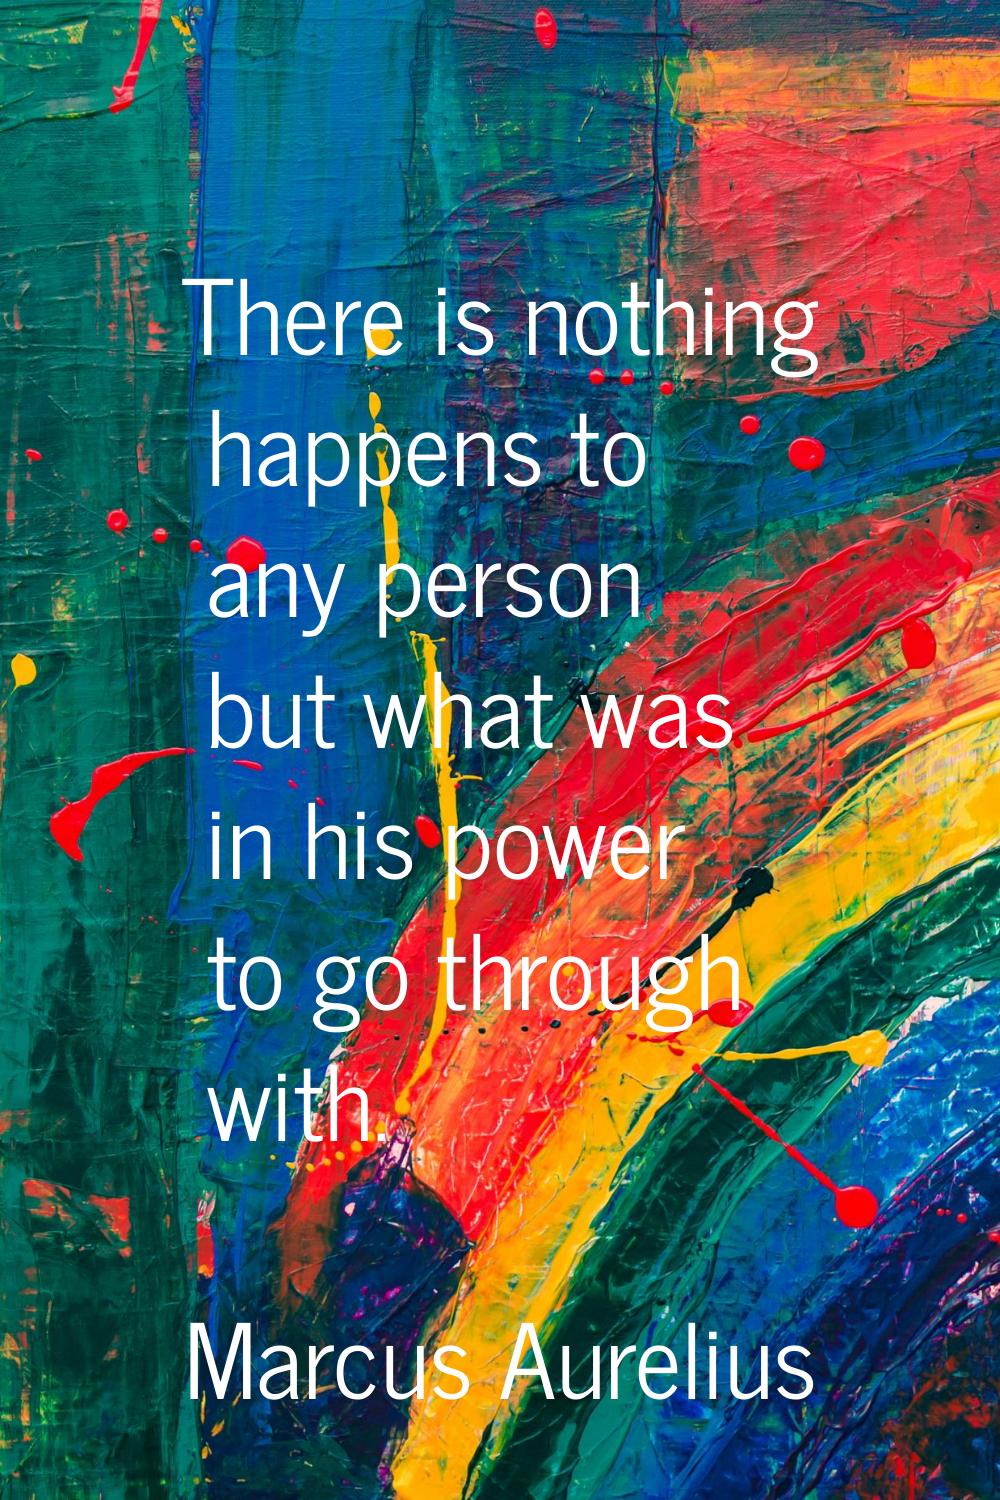 There is nothing happens to any person but what was in his power to go through with.